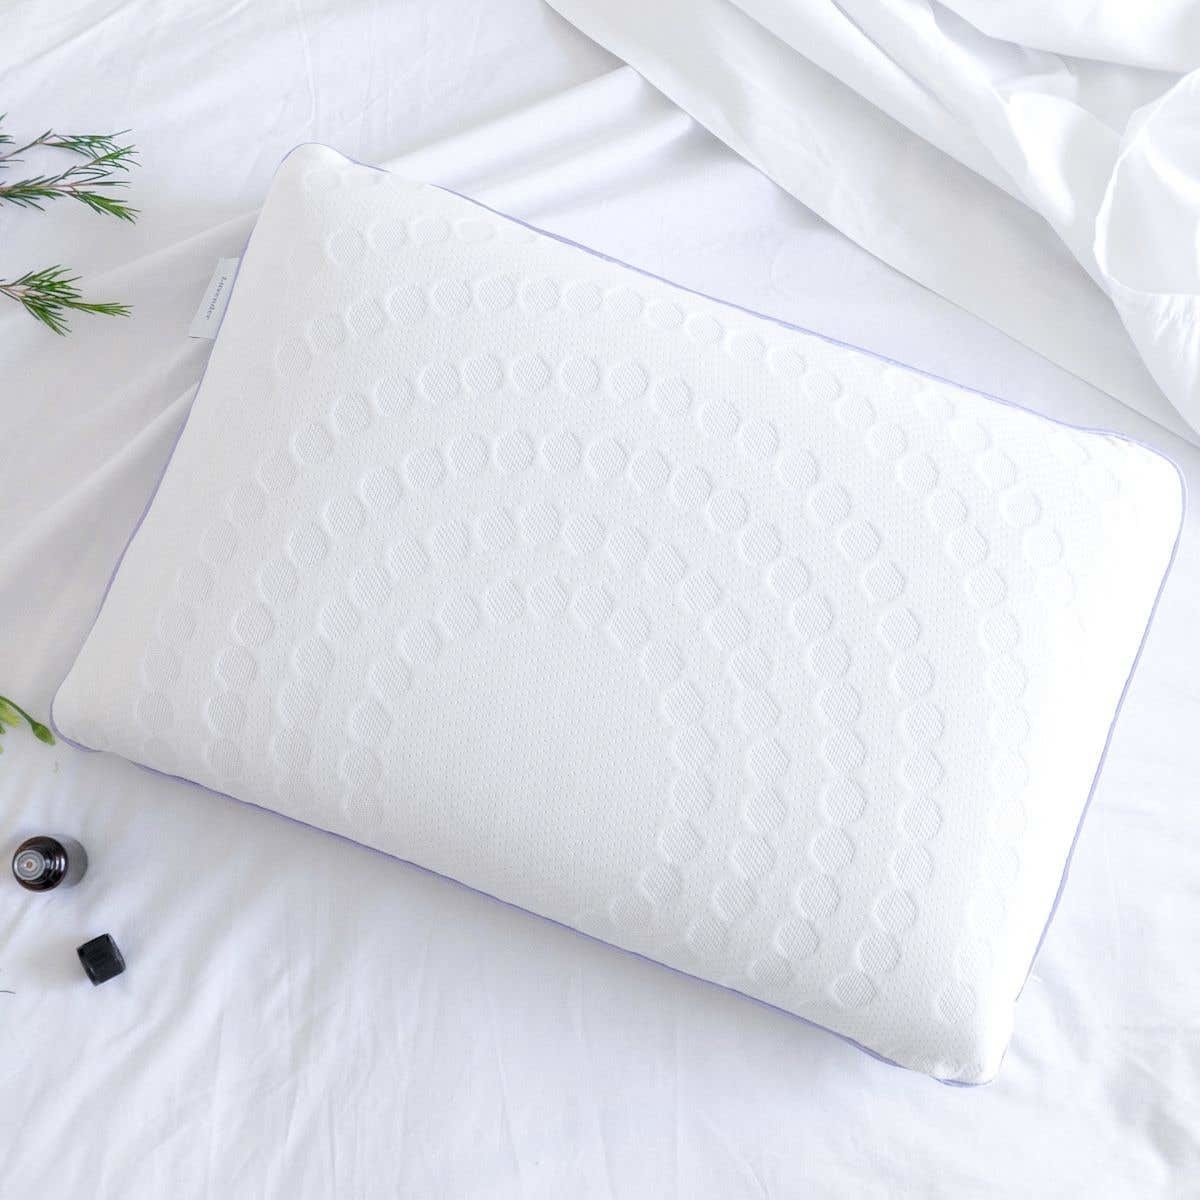 A large pillow on a bed